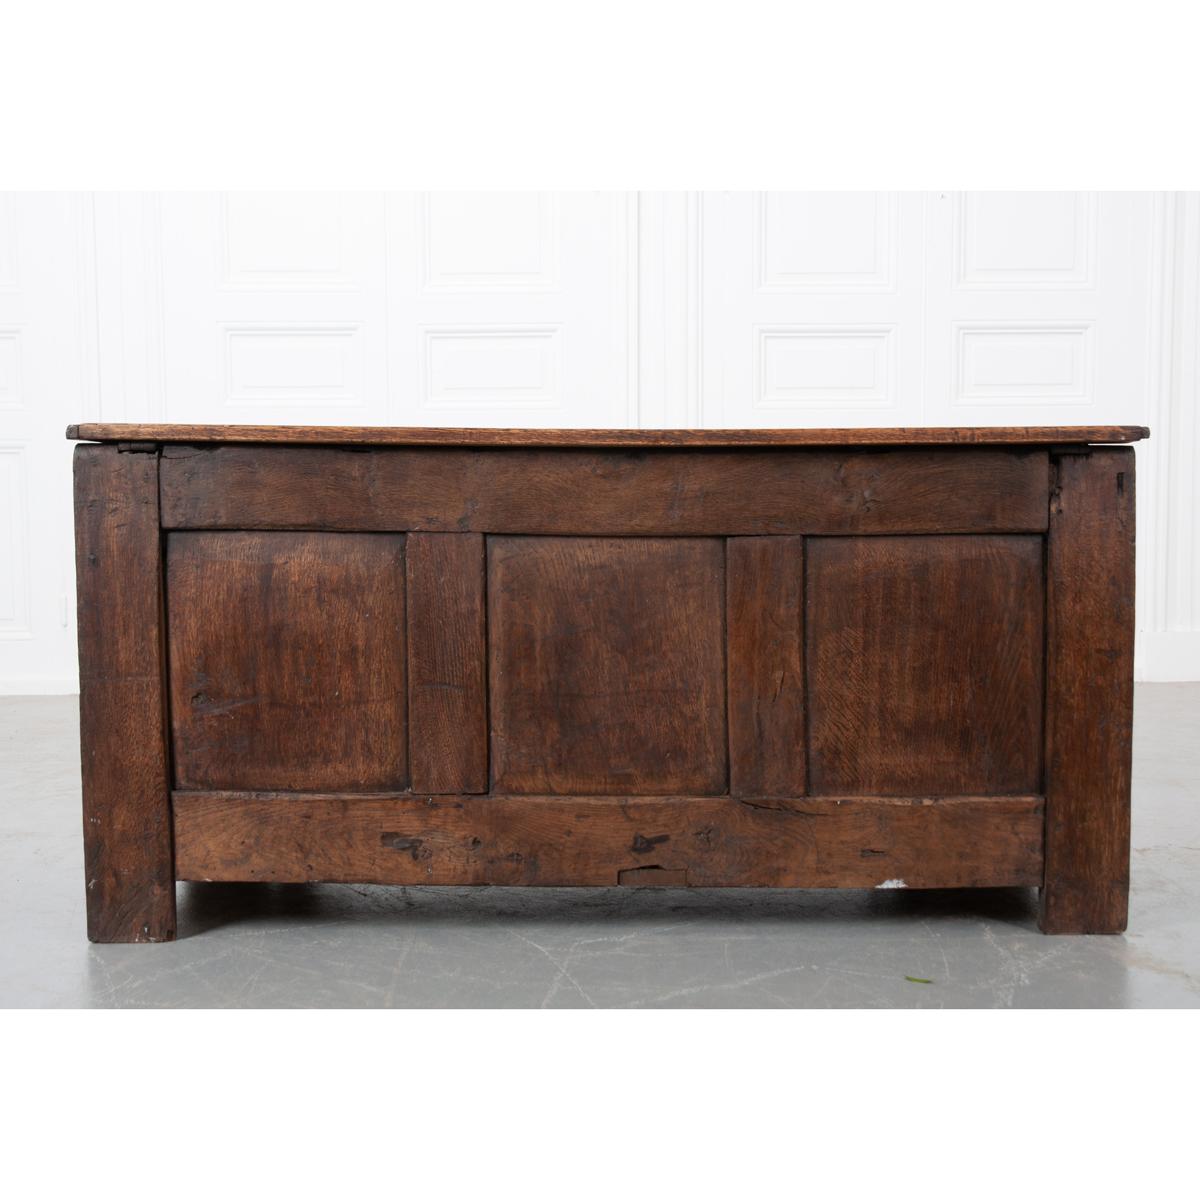 English Early 18th Century Carved Coffer 1